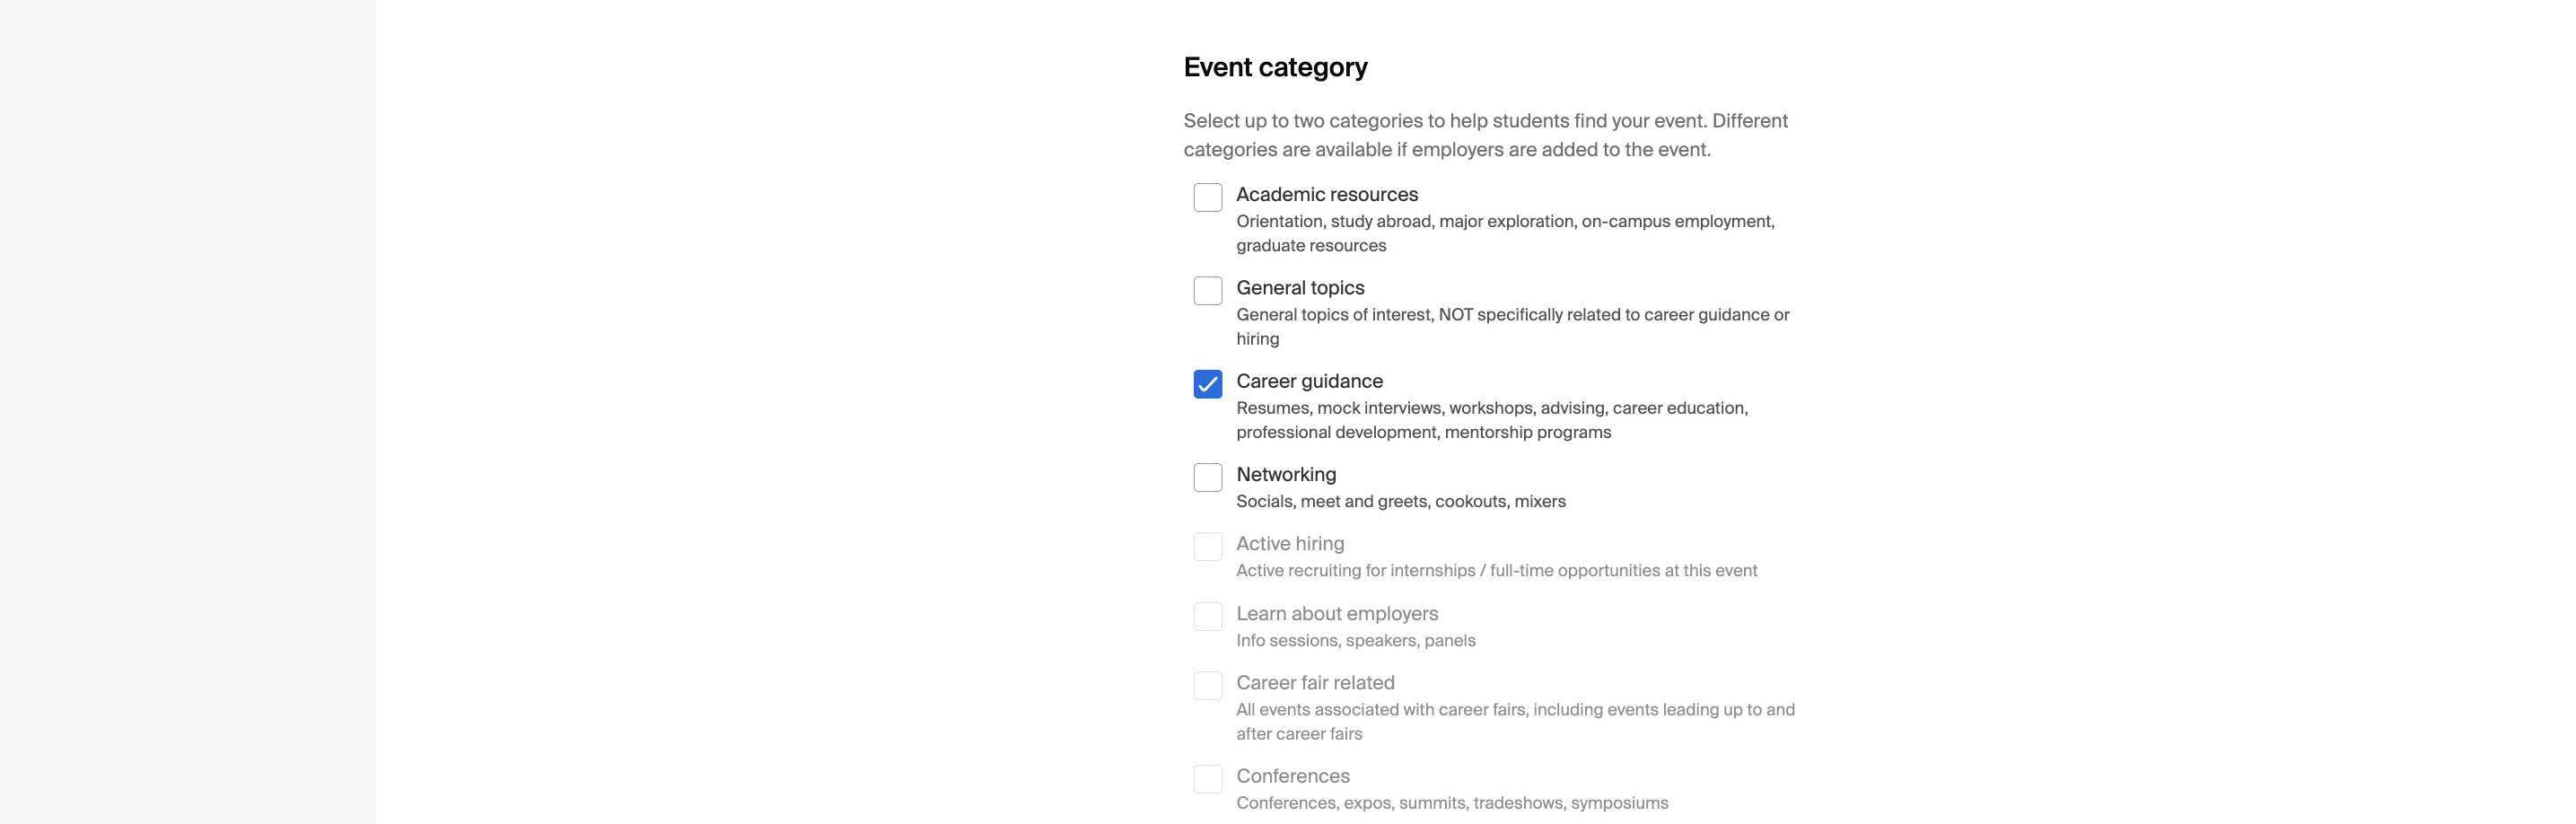 Employer_Categories.png